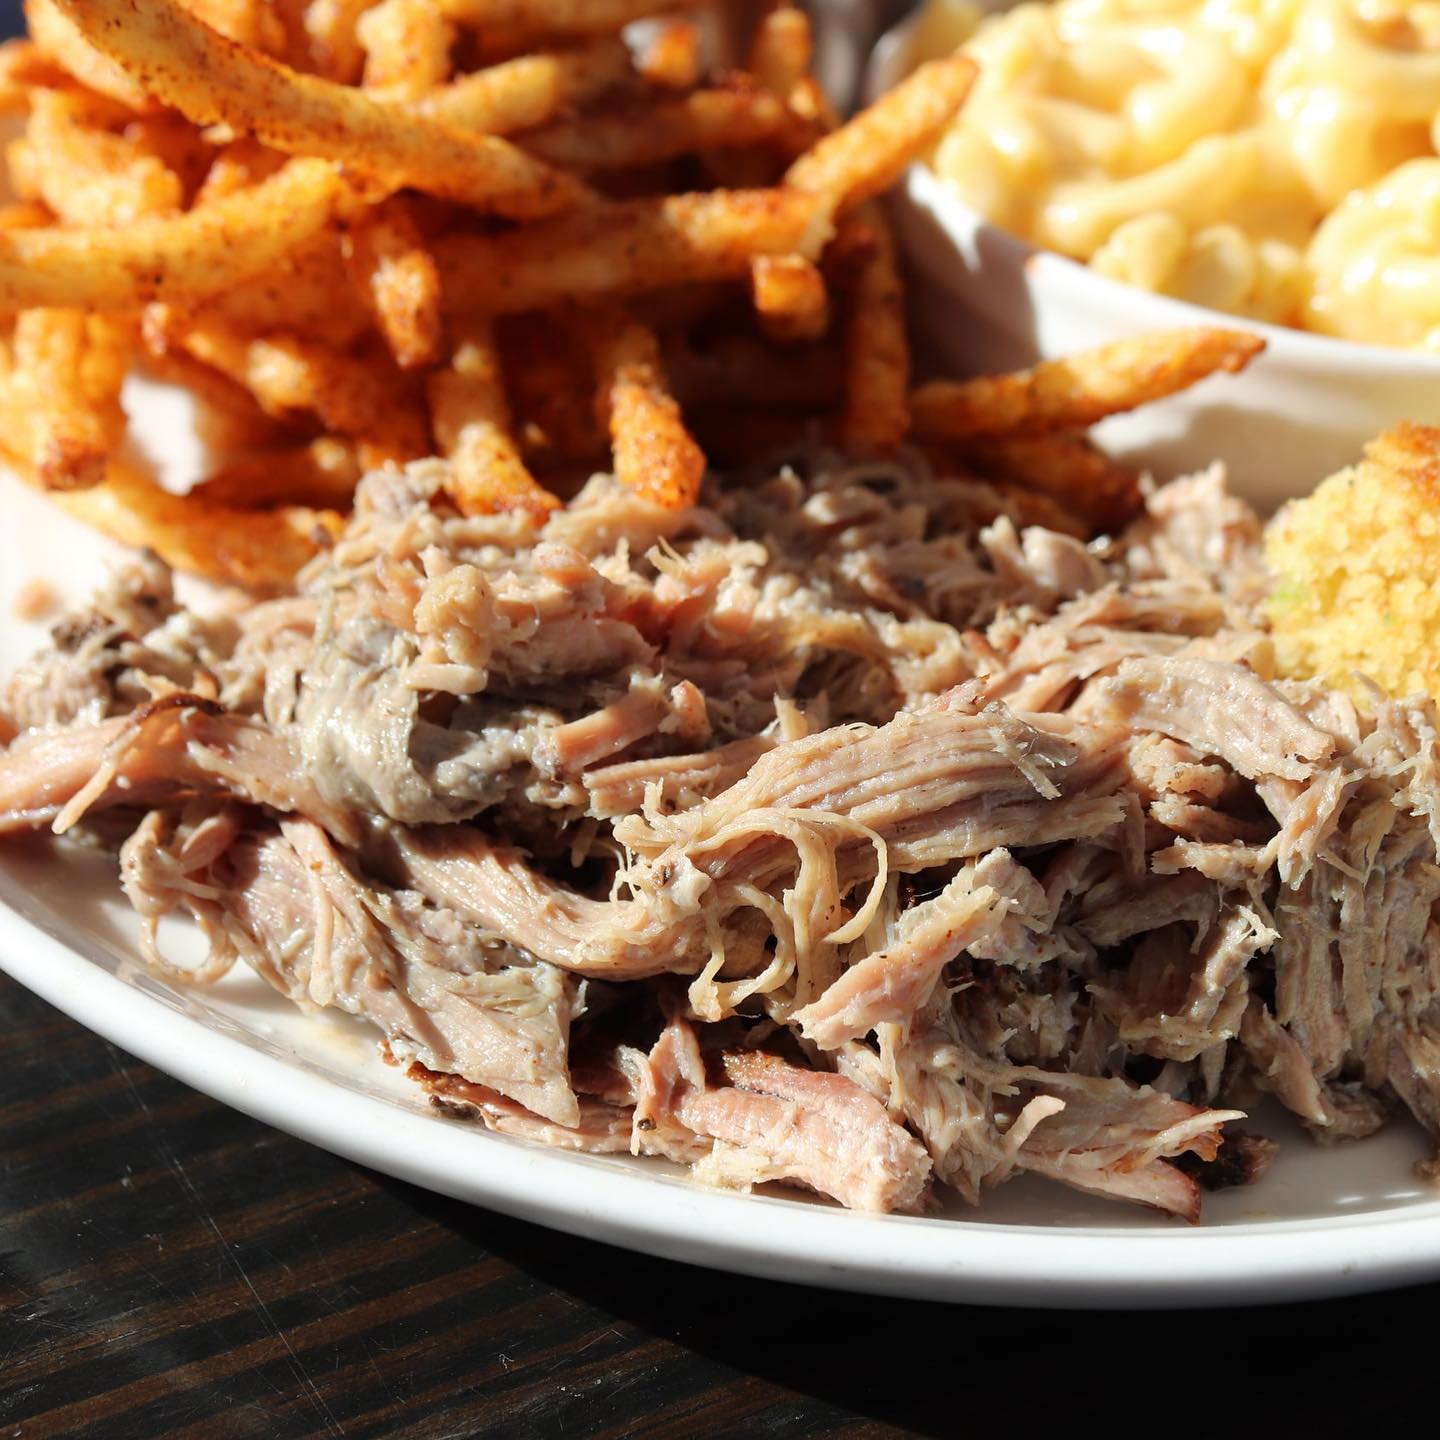 A plate of pulled pork with a side of seasoned fries and cornbread from Texican Barbecue in Roswell, GA